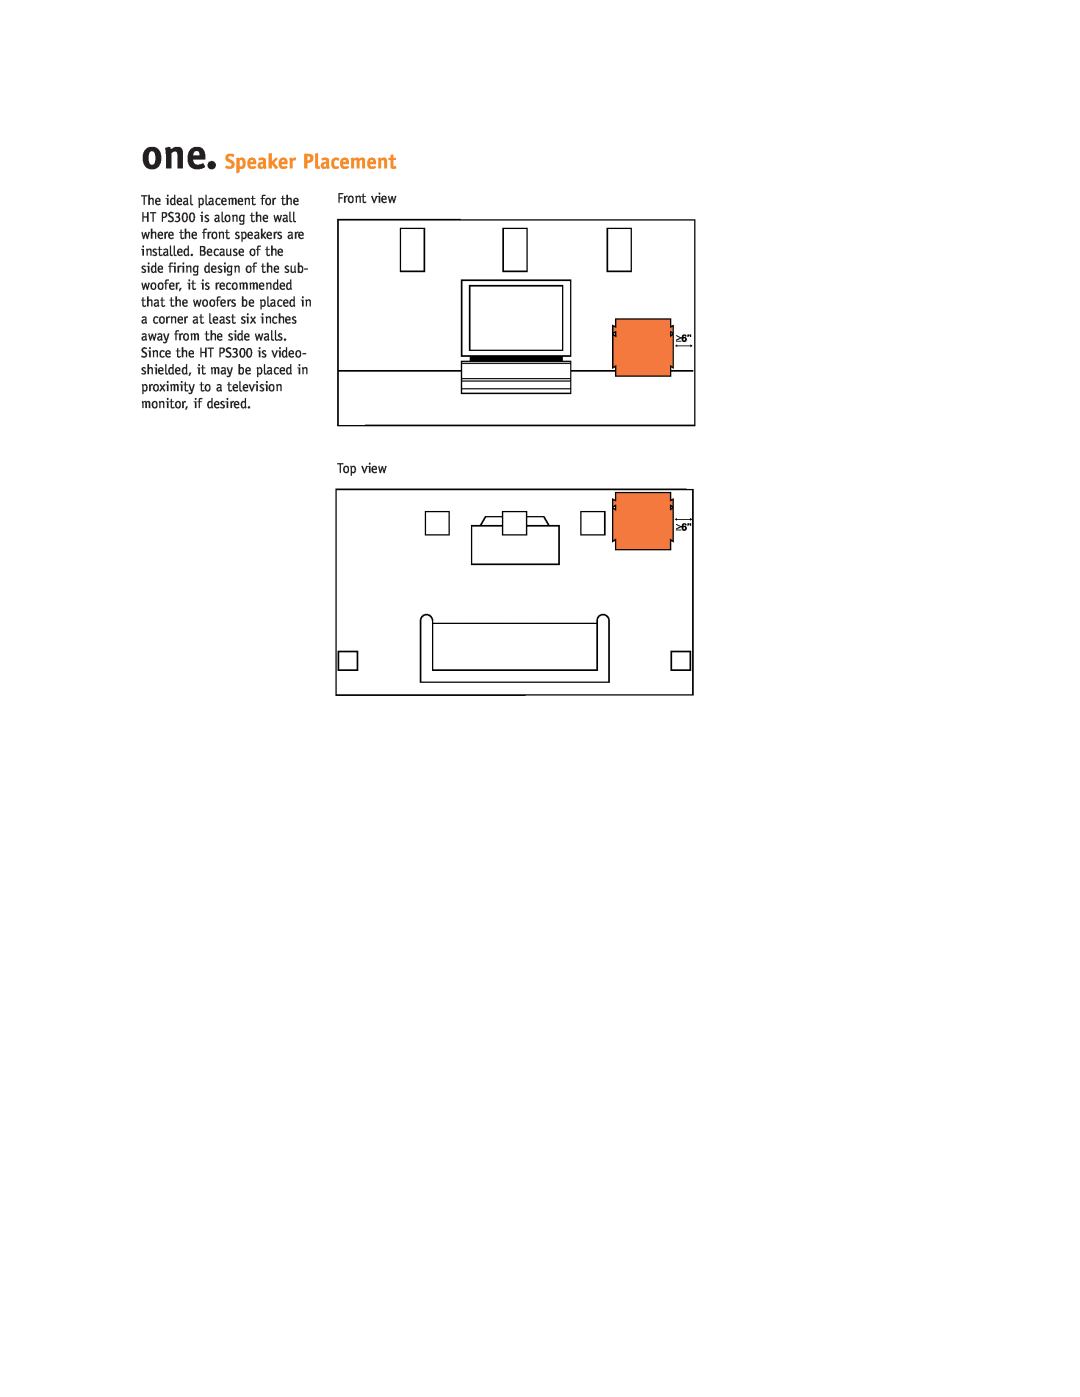 JBL HT PS300 setup guide one. Speaker Placement 